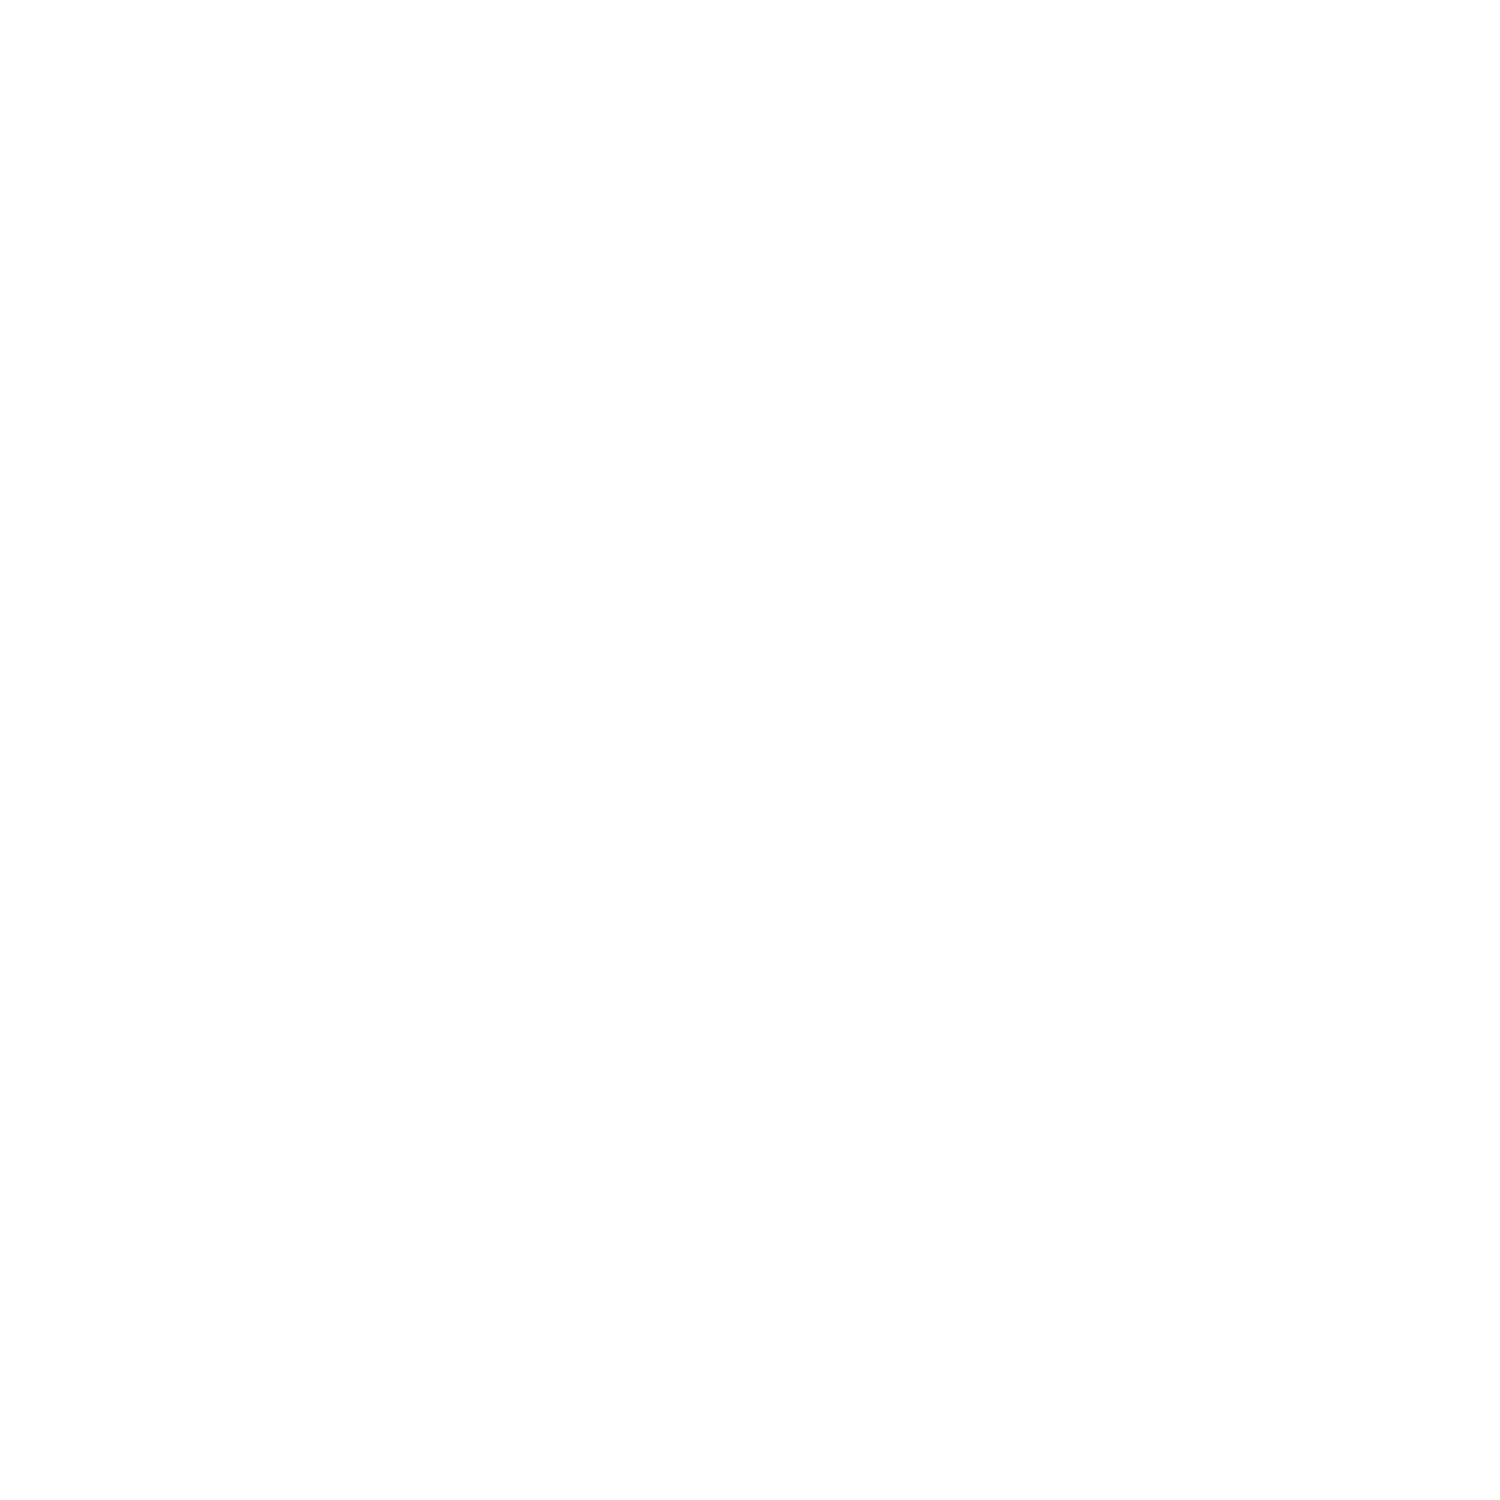 The National Student Television Association